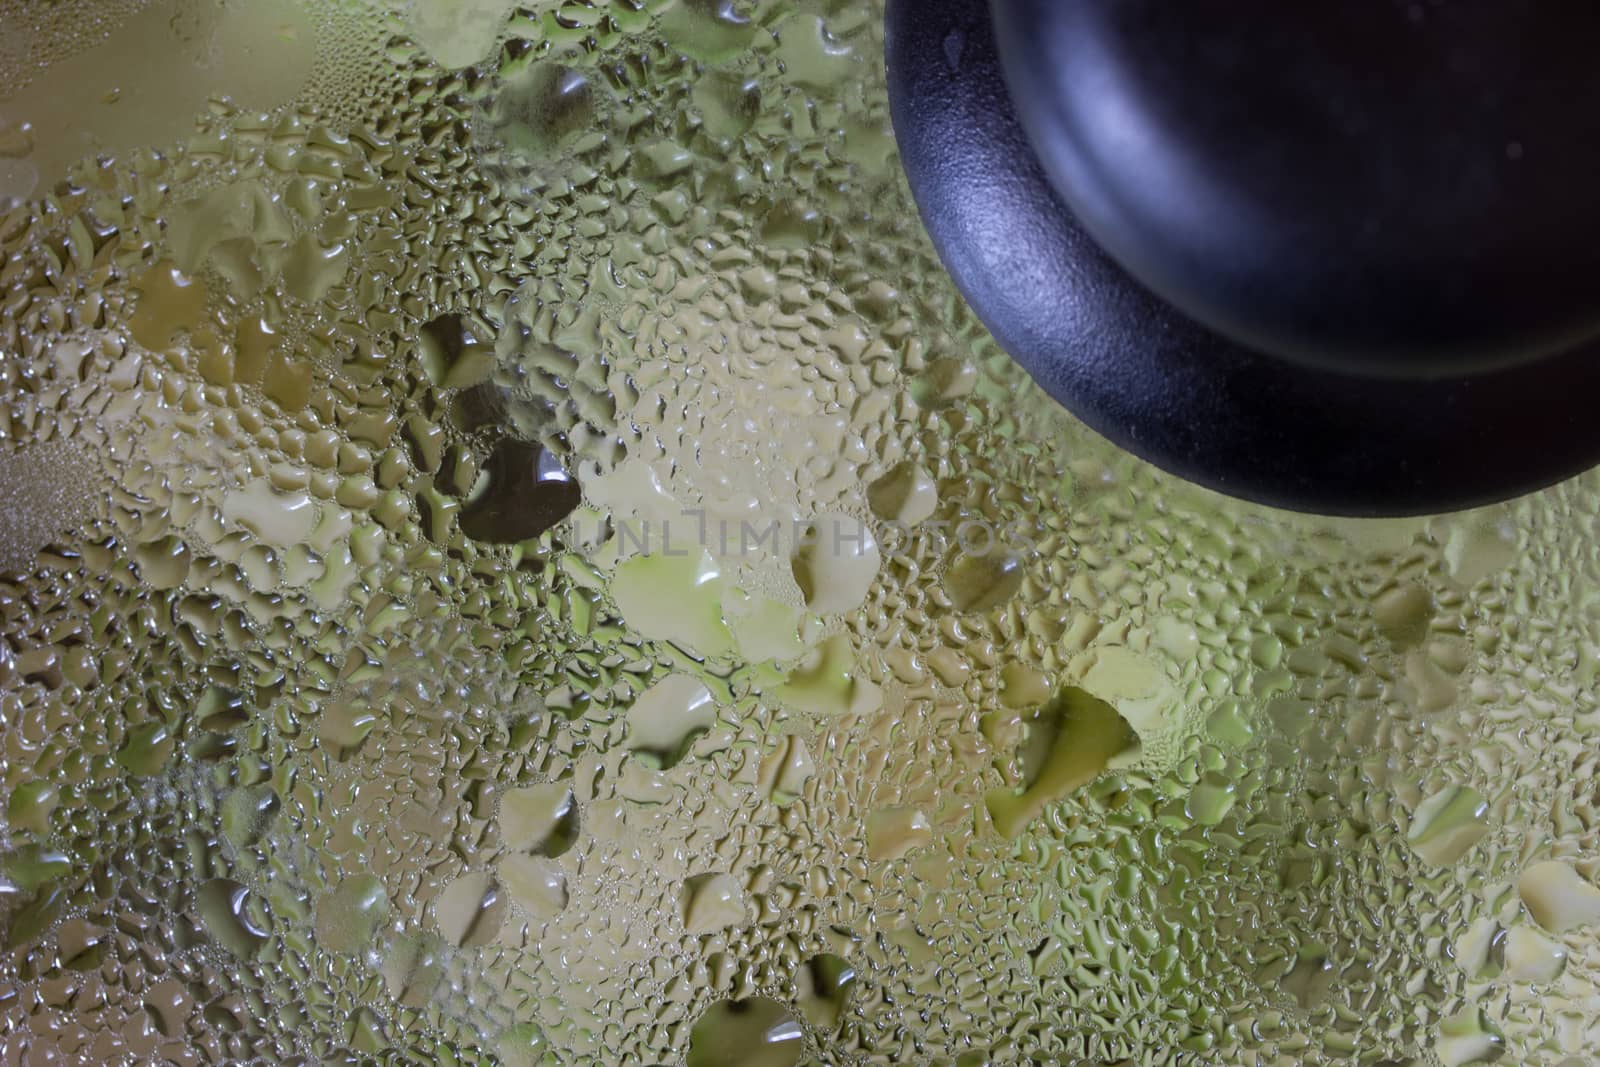 Close up of frying pan lid with water drops